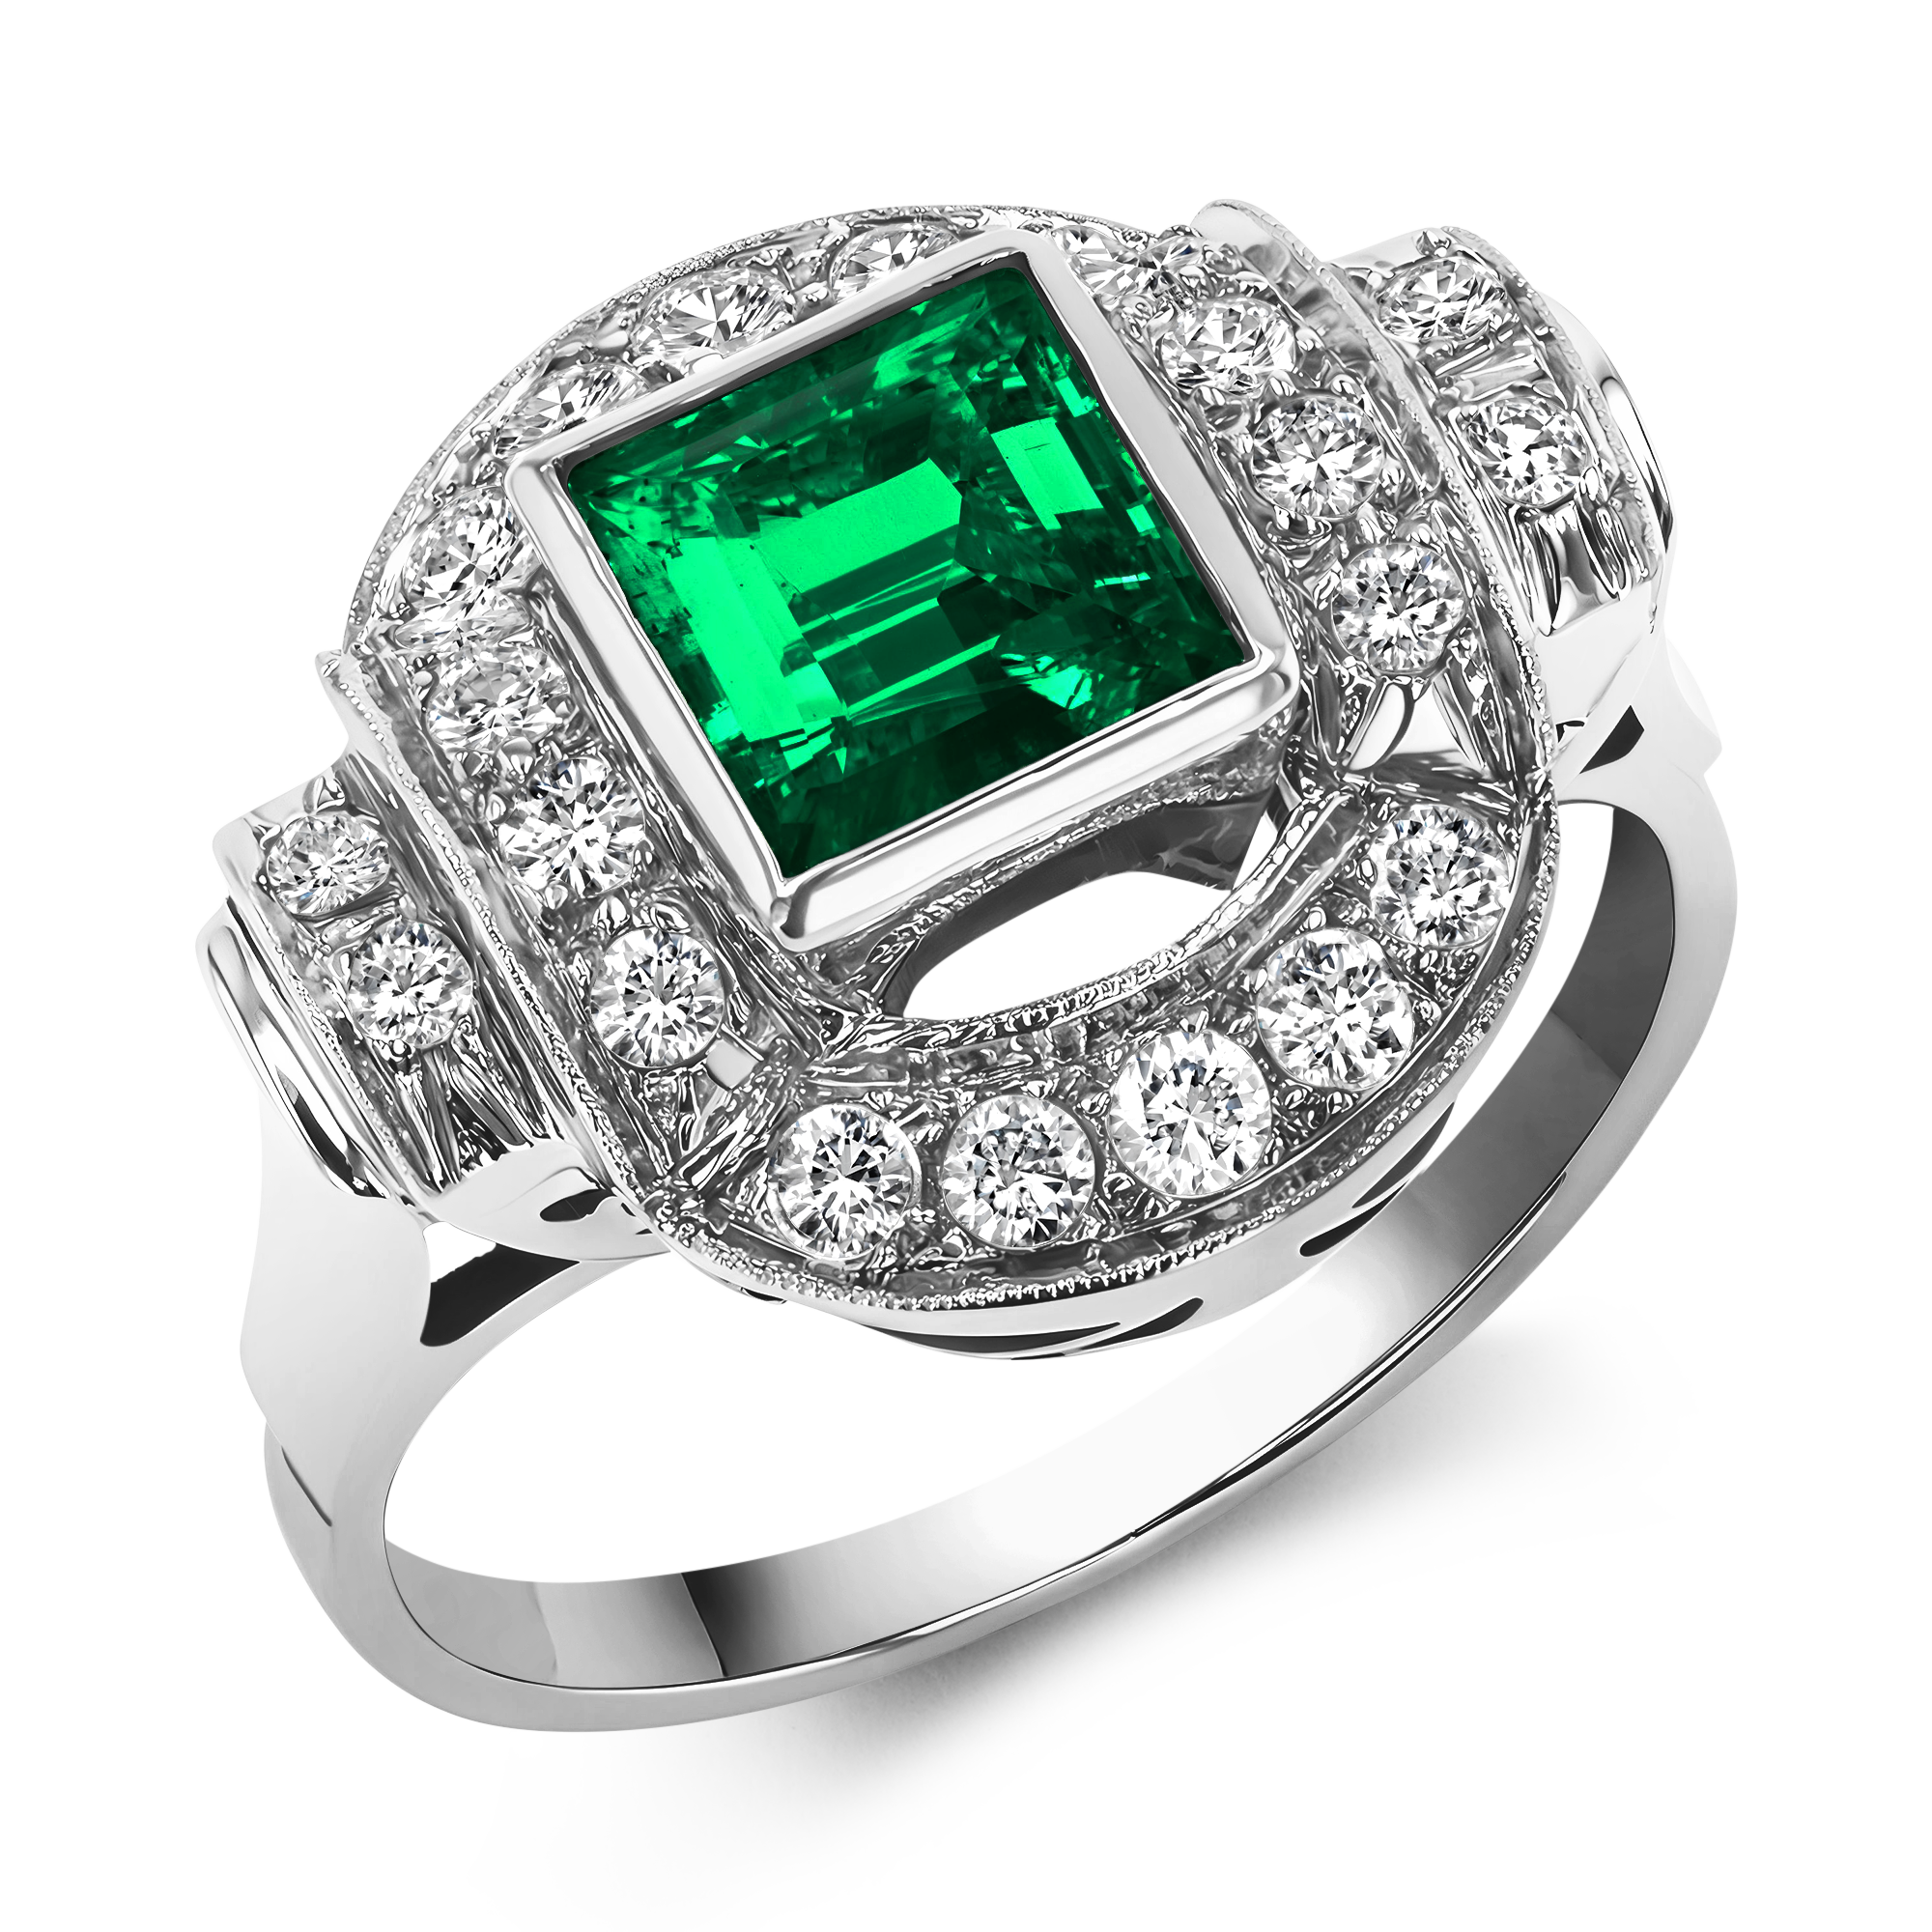 Art Deco Emerald and Diamond Cocktail Ring Emerald Cut, Rubover Set_1